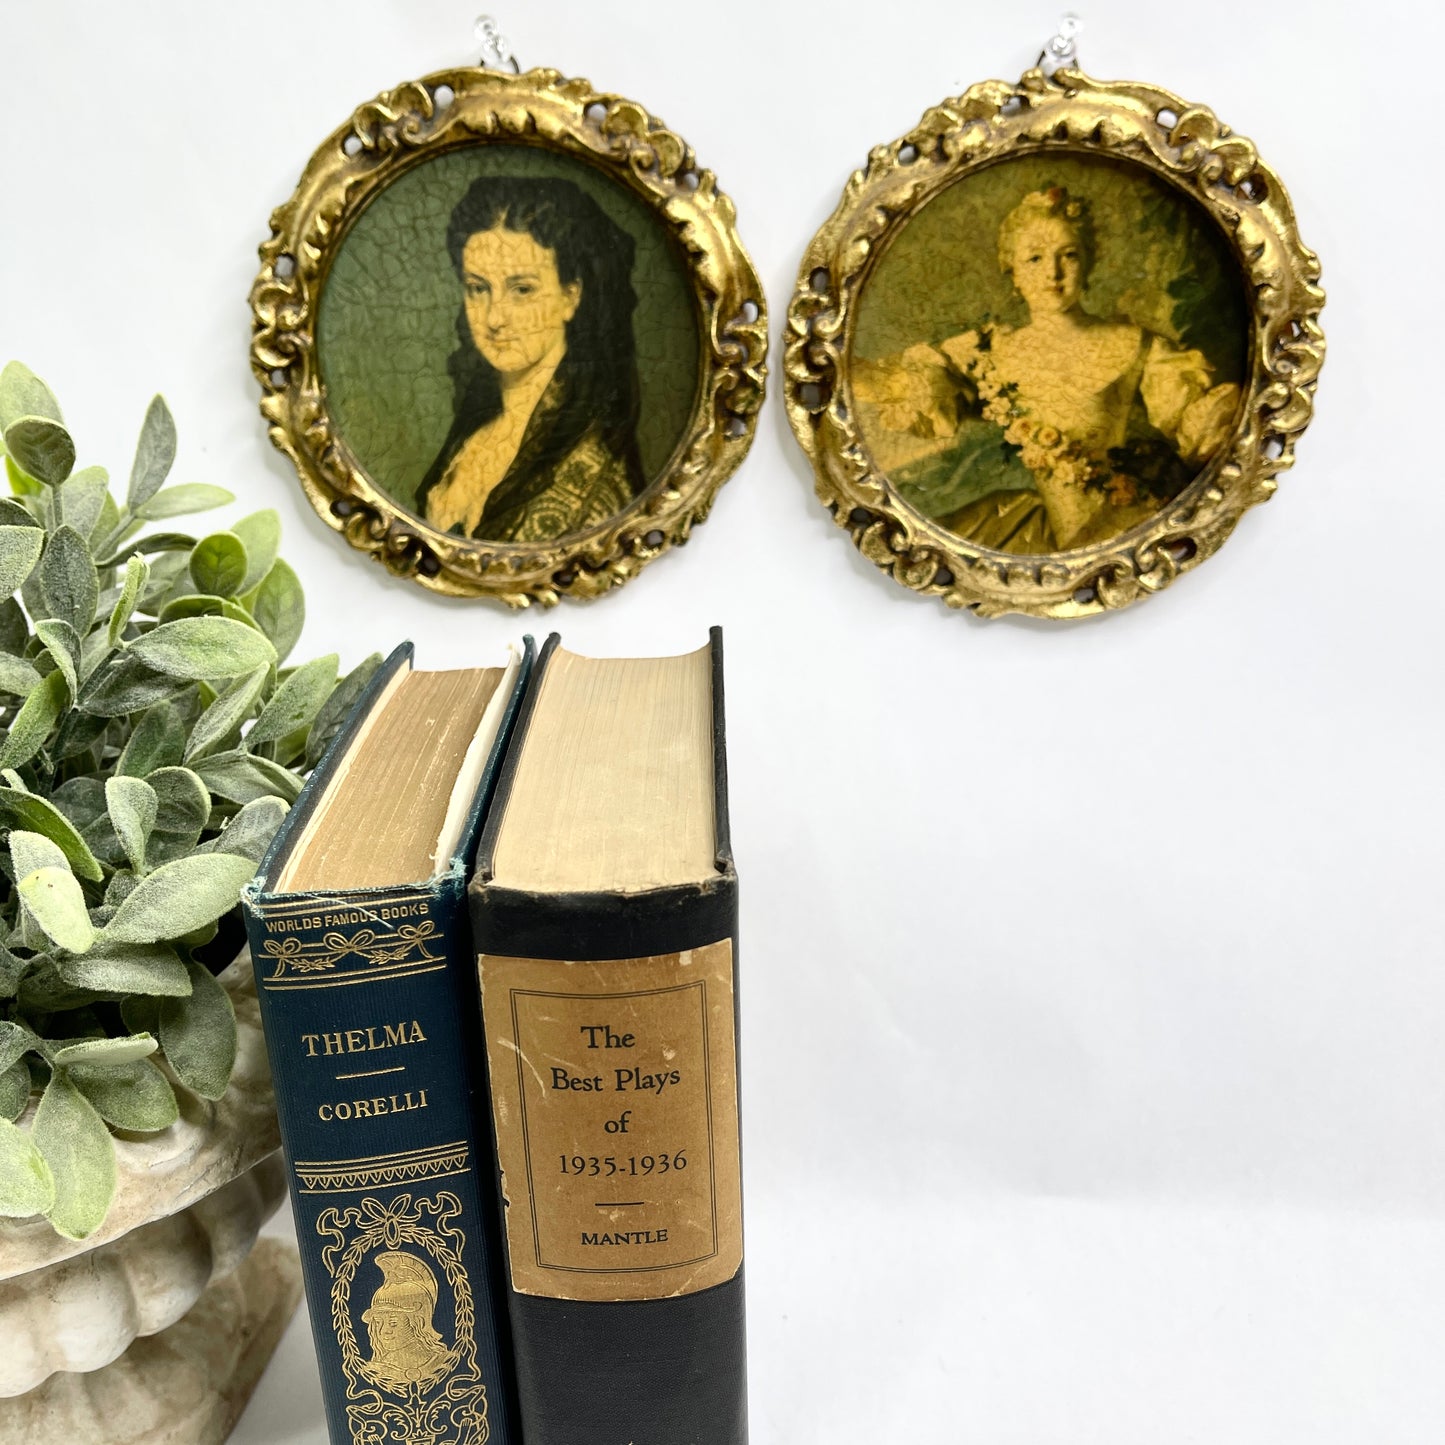 Vintage Florentine Art - Price is for the Pair